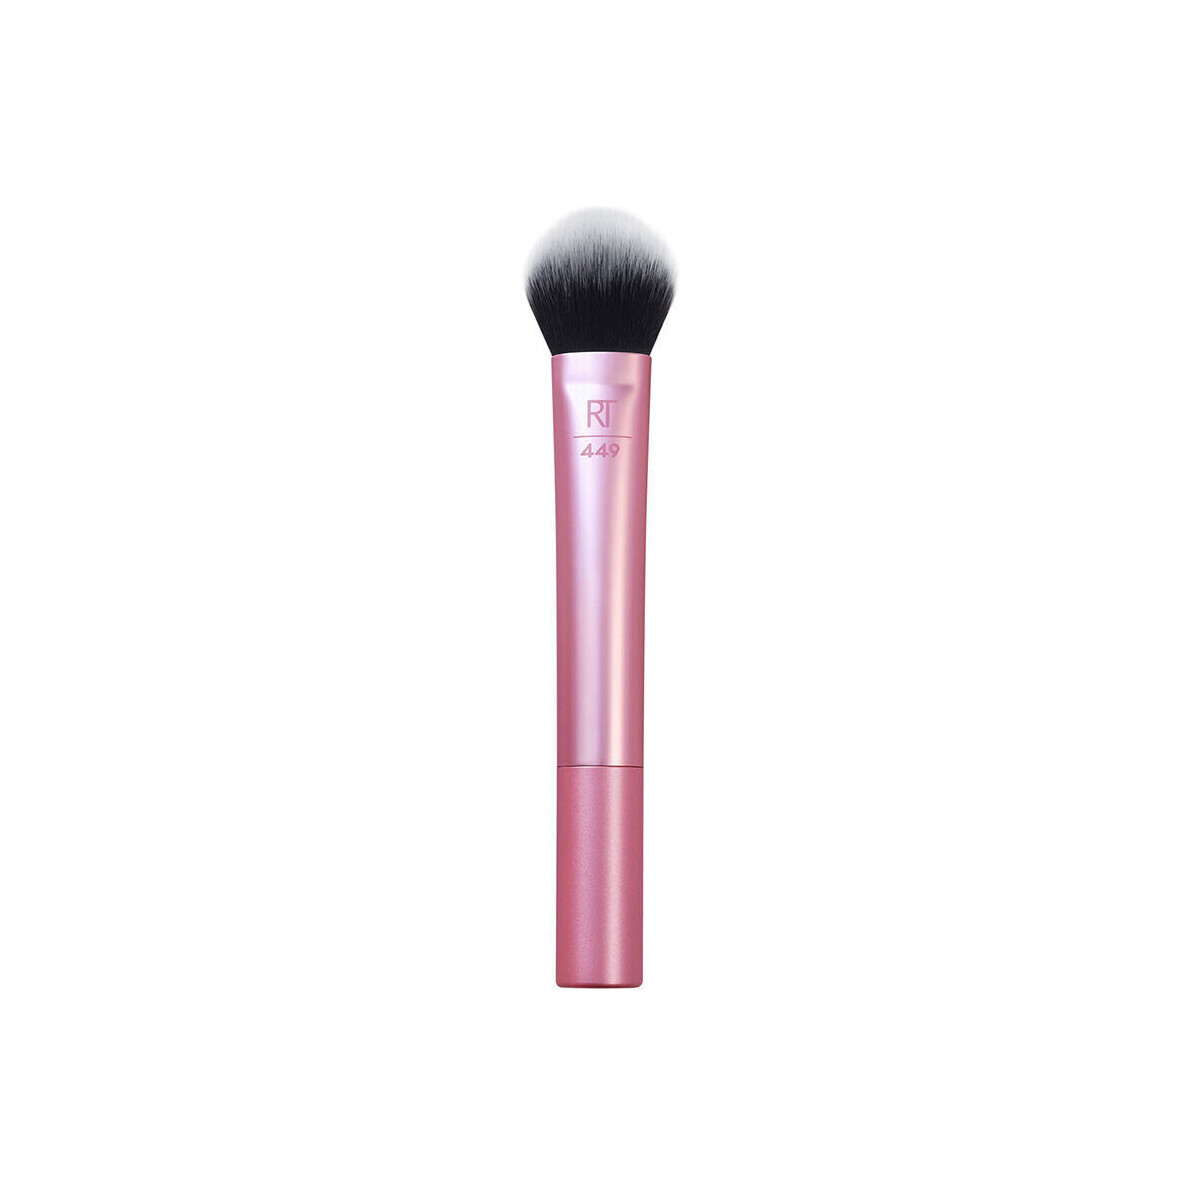 Bellezza Pennelli Real Techniques Tapered Cheek Brush 